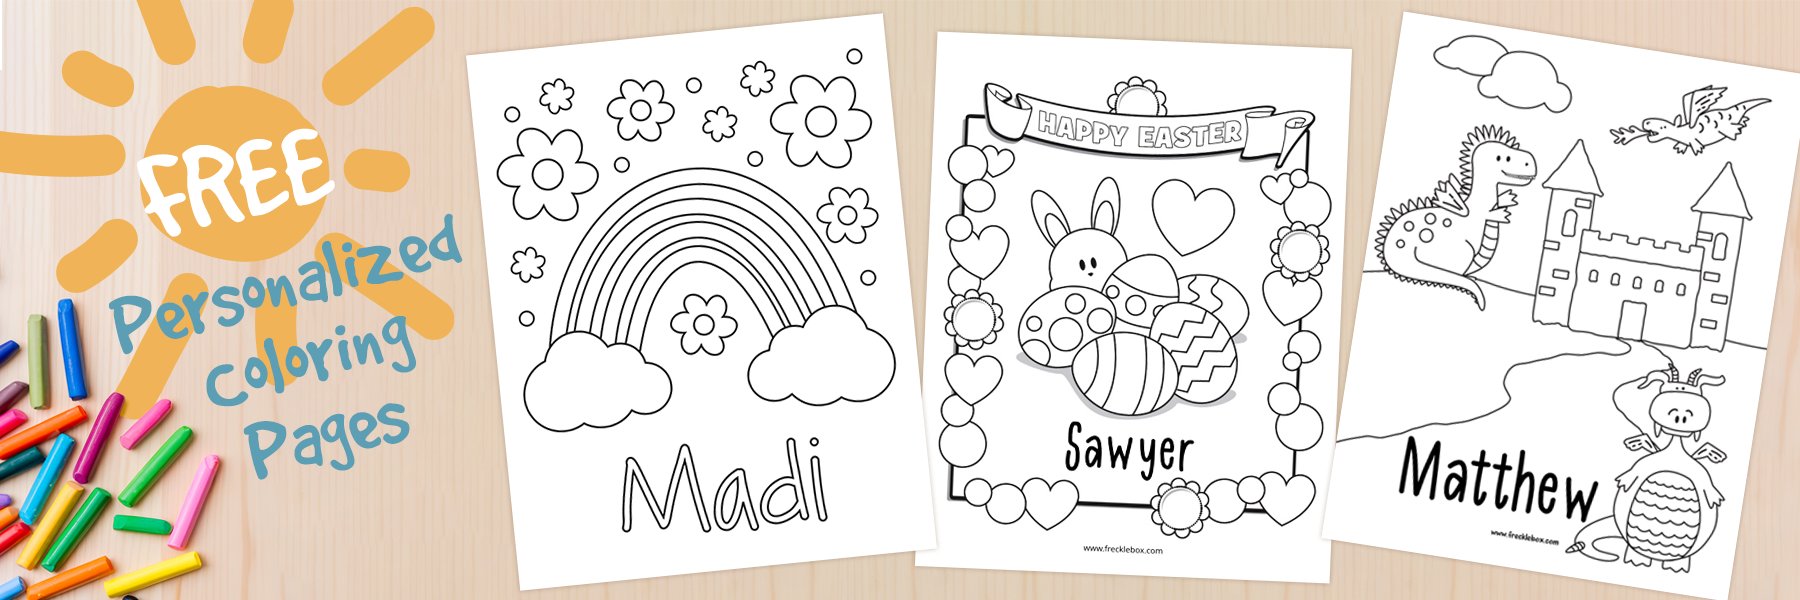 Free coloring pages personalized with children's names.